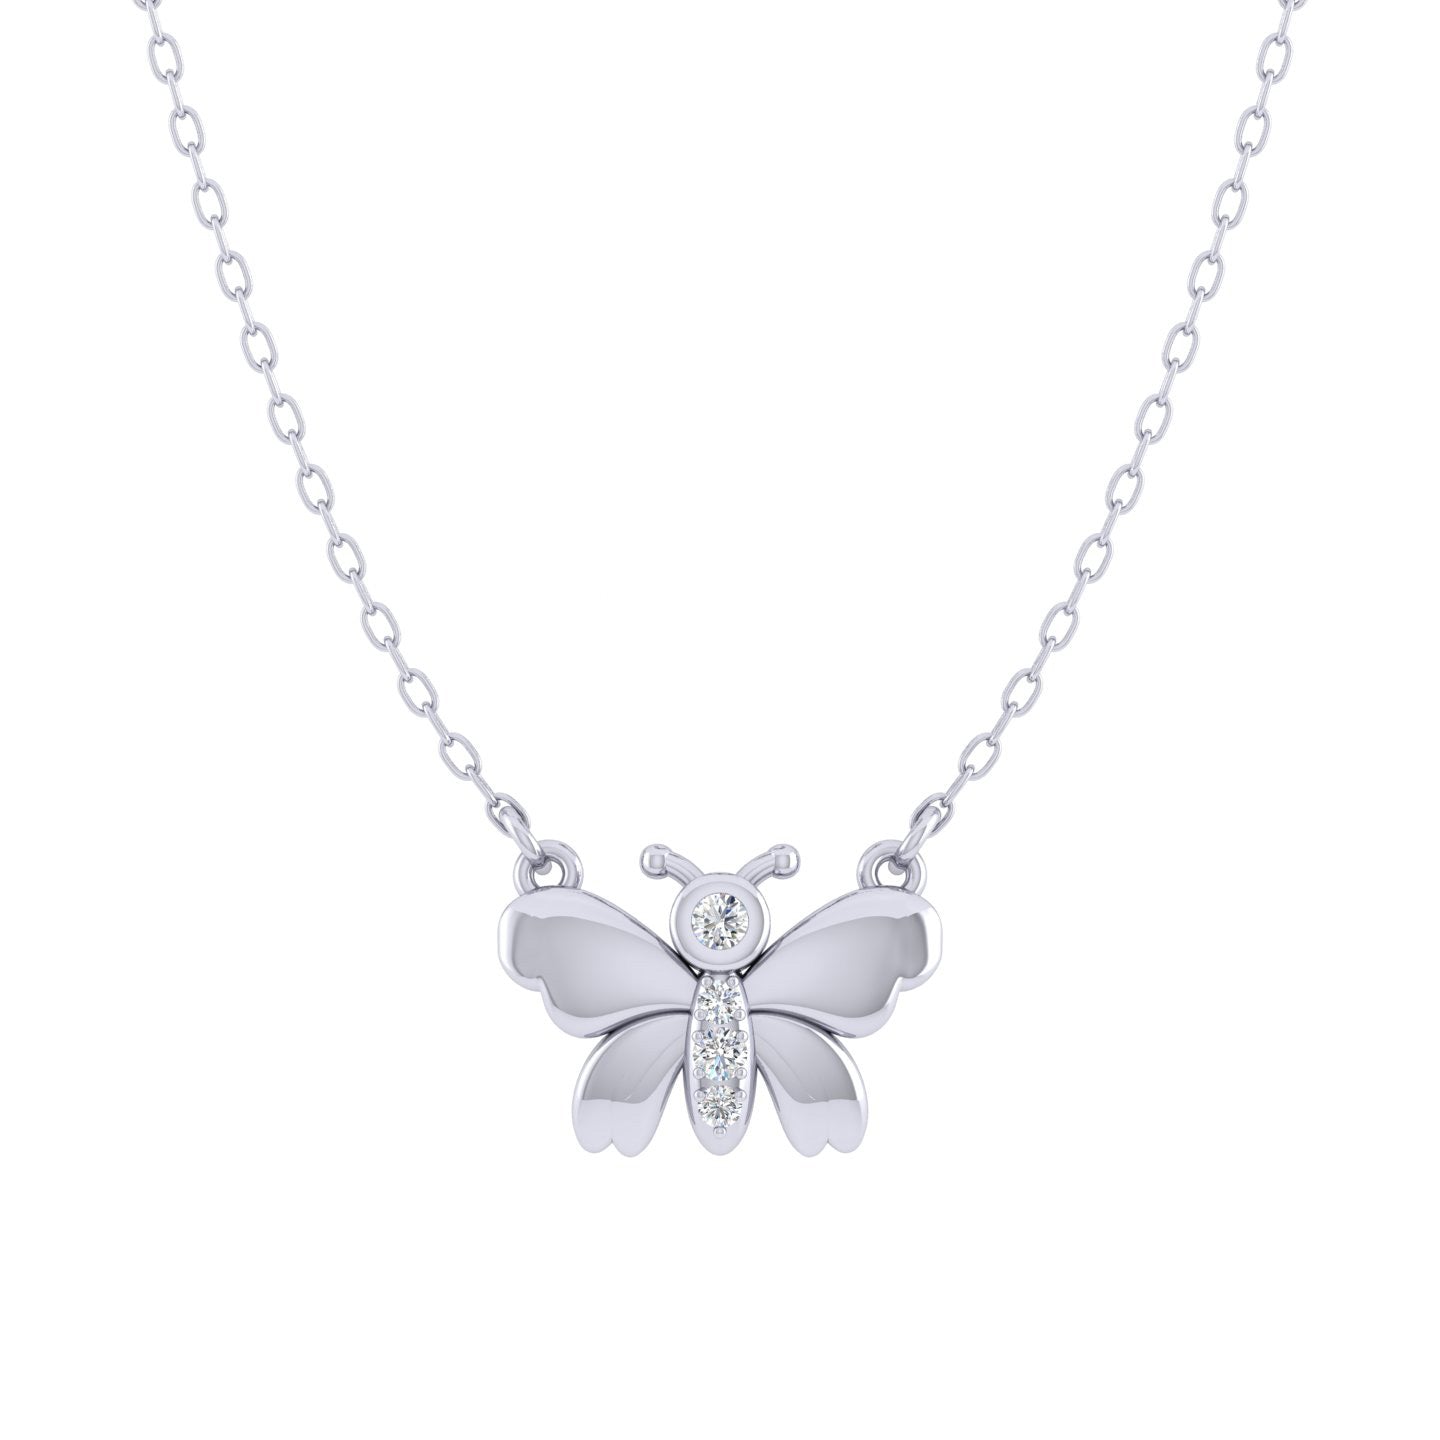 Dainty Butterfly 1/20 Cttw Natural Diamond Pendant Necklace set in 925 Sterling Silver jewelry gift